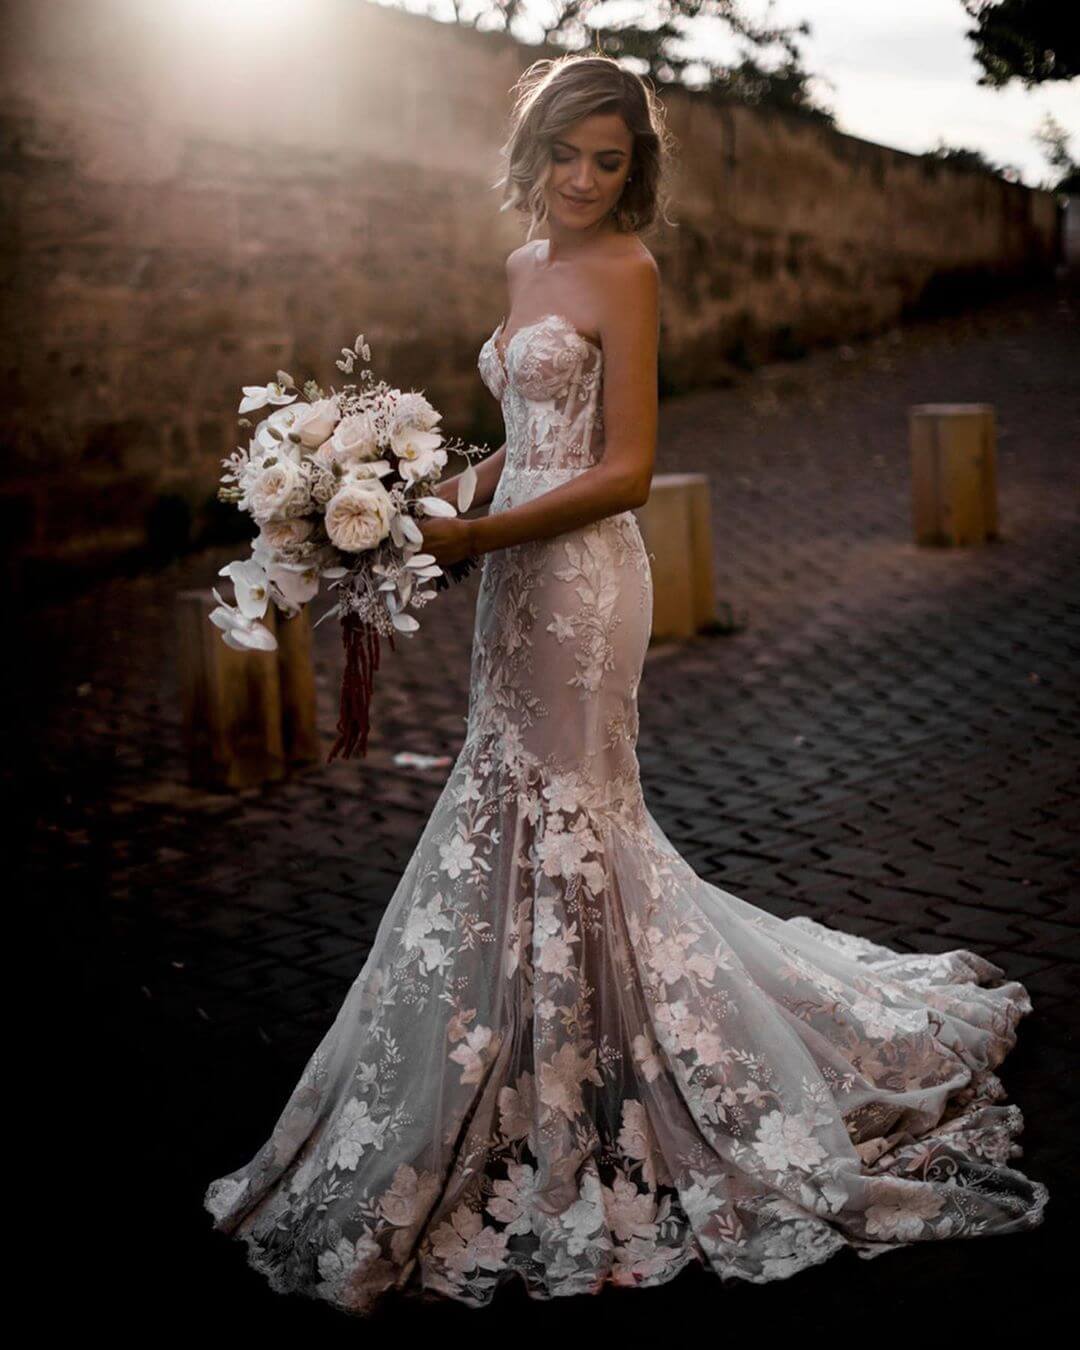 Christian bridal gowns